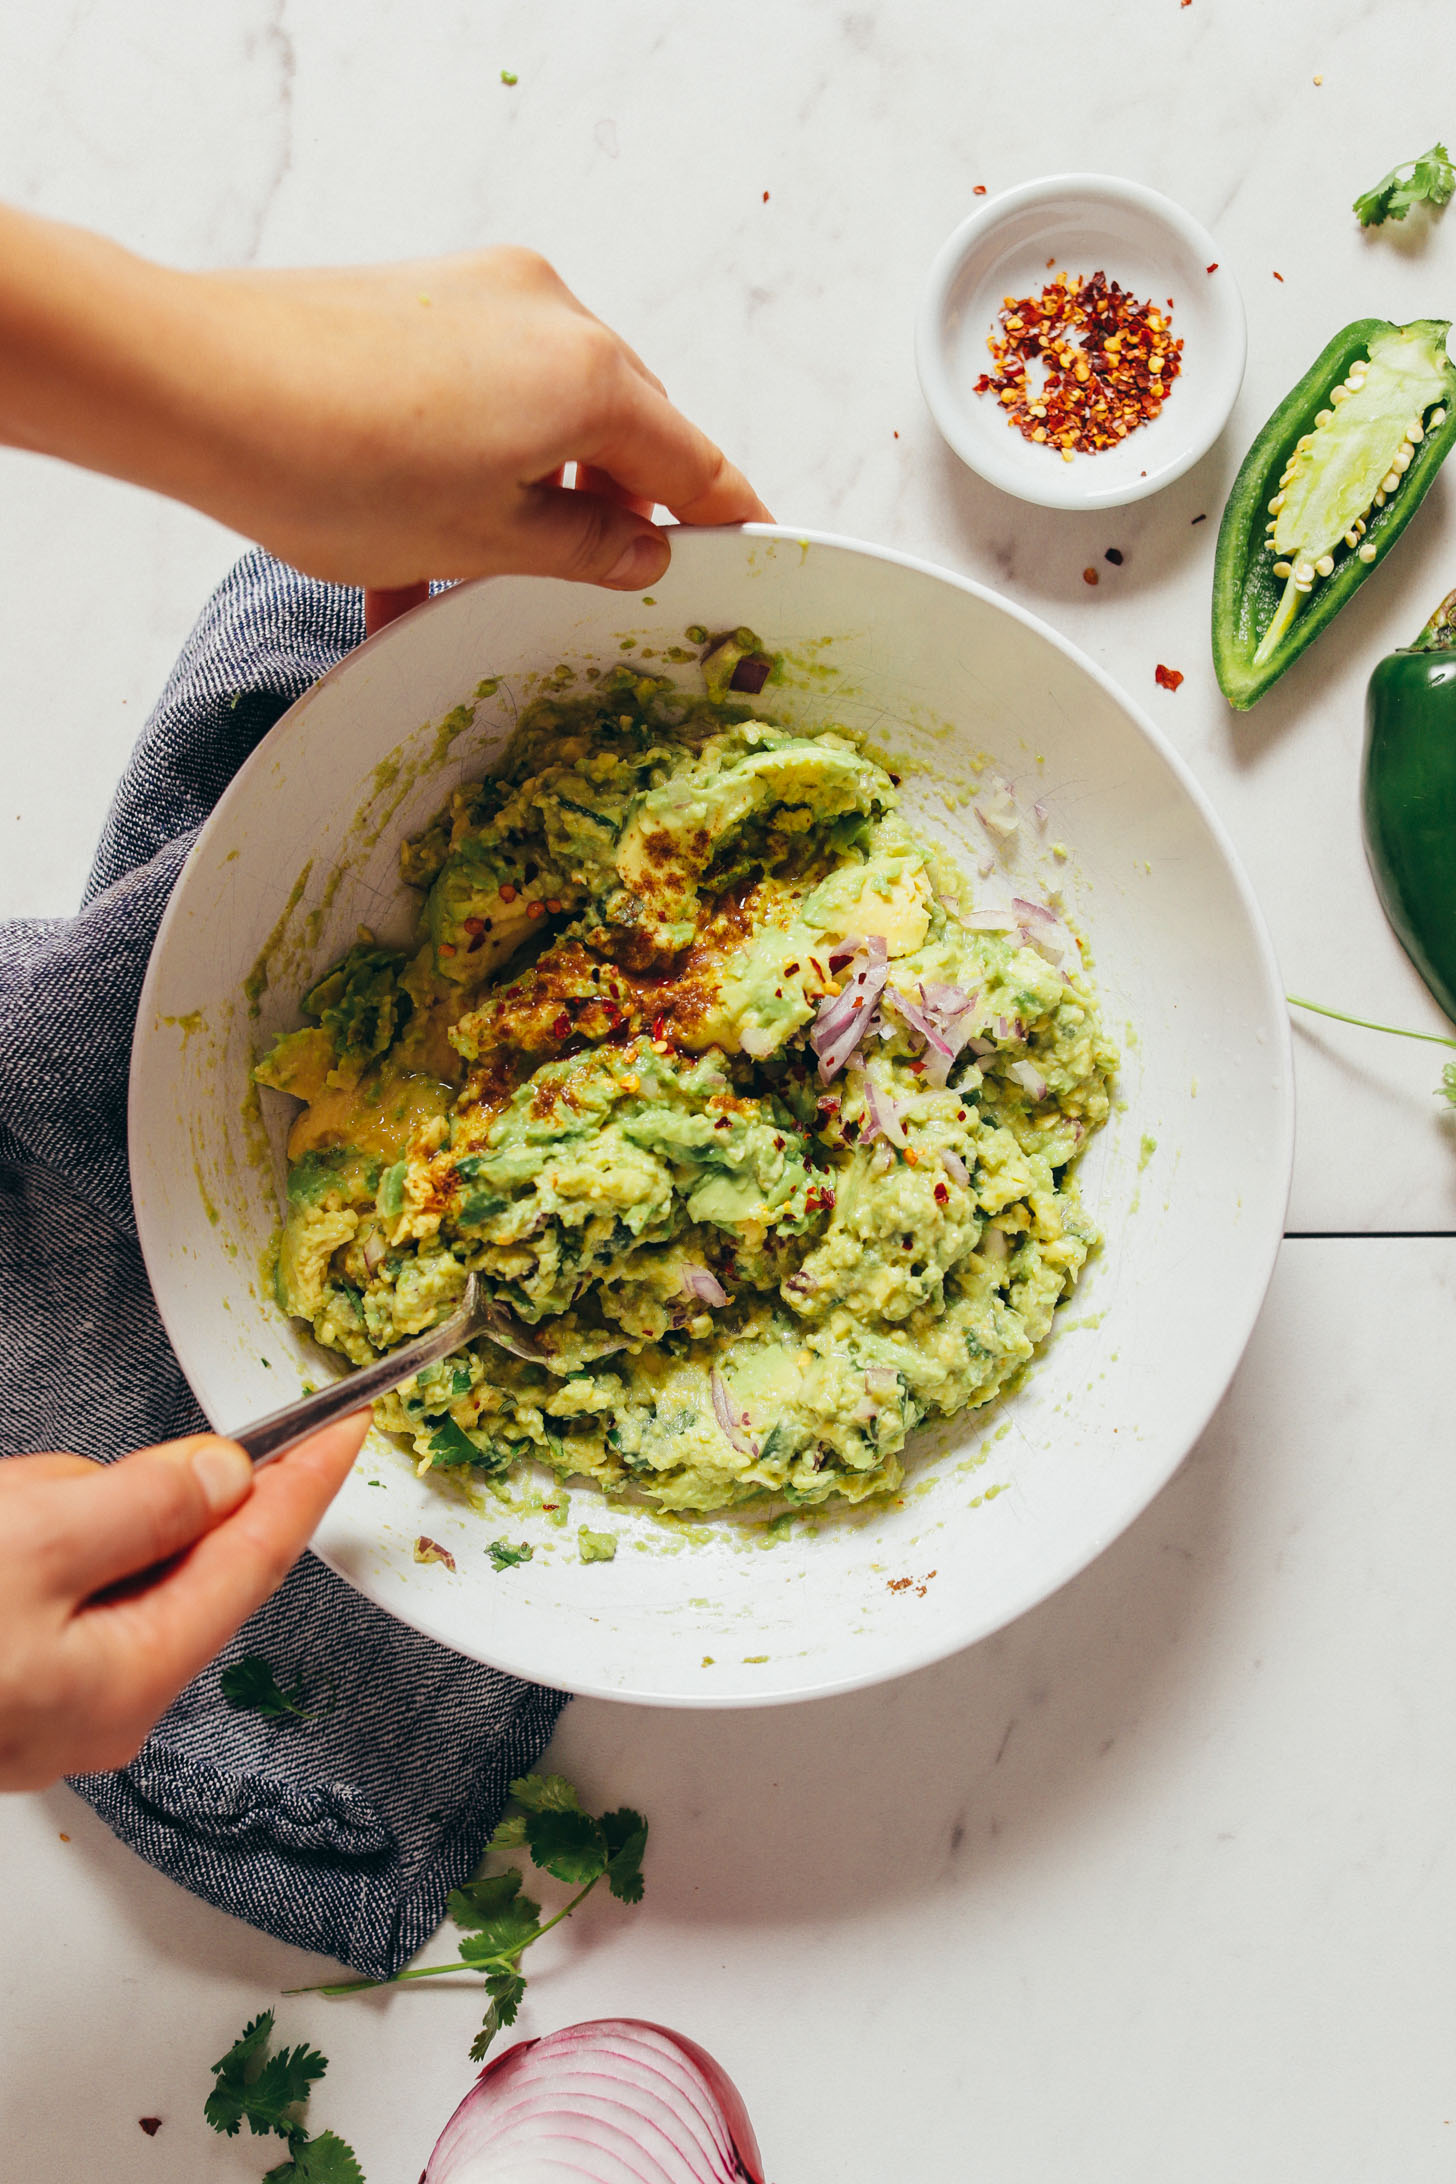 Overhead image of guacamole being stirred in a white bowl set over a blue towel